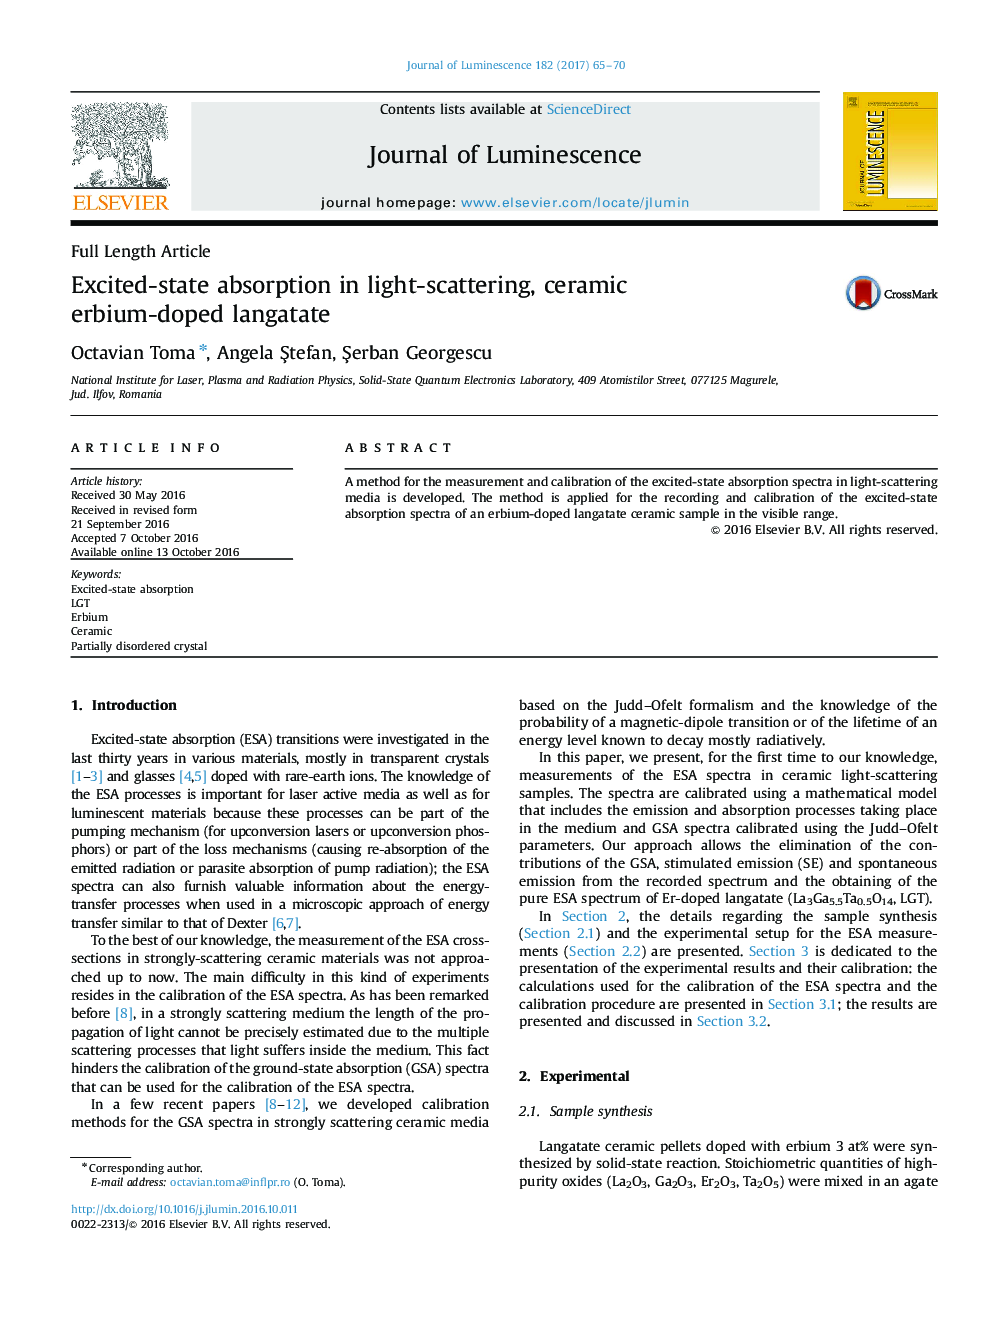 Excited-state absorption in light-scattering, ceramic erbium-doped langatate